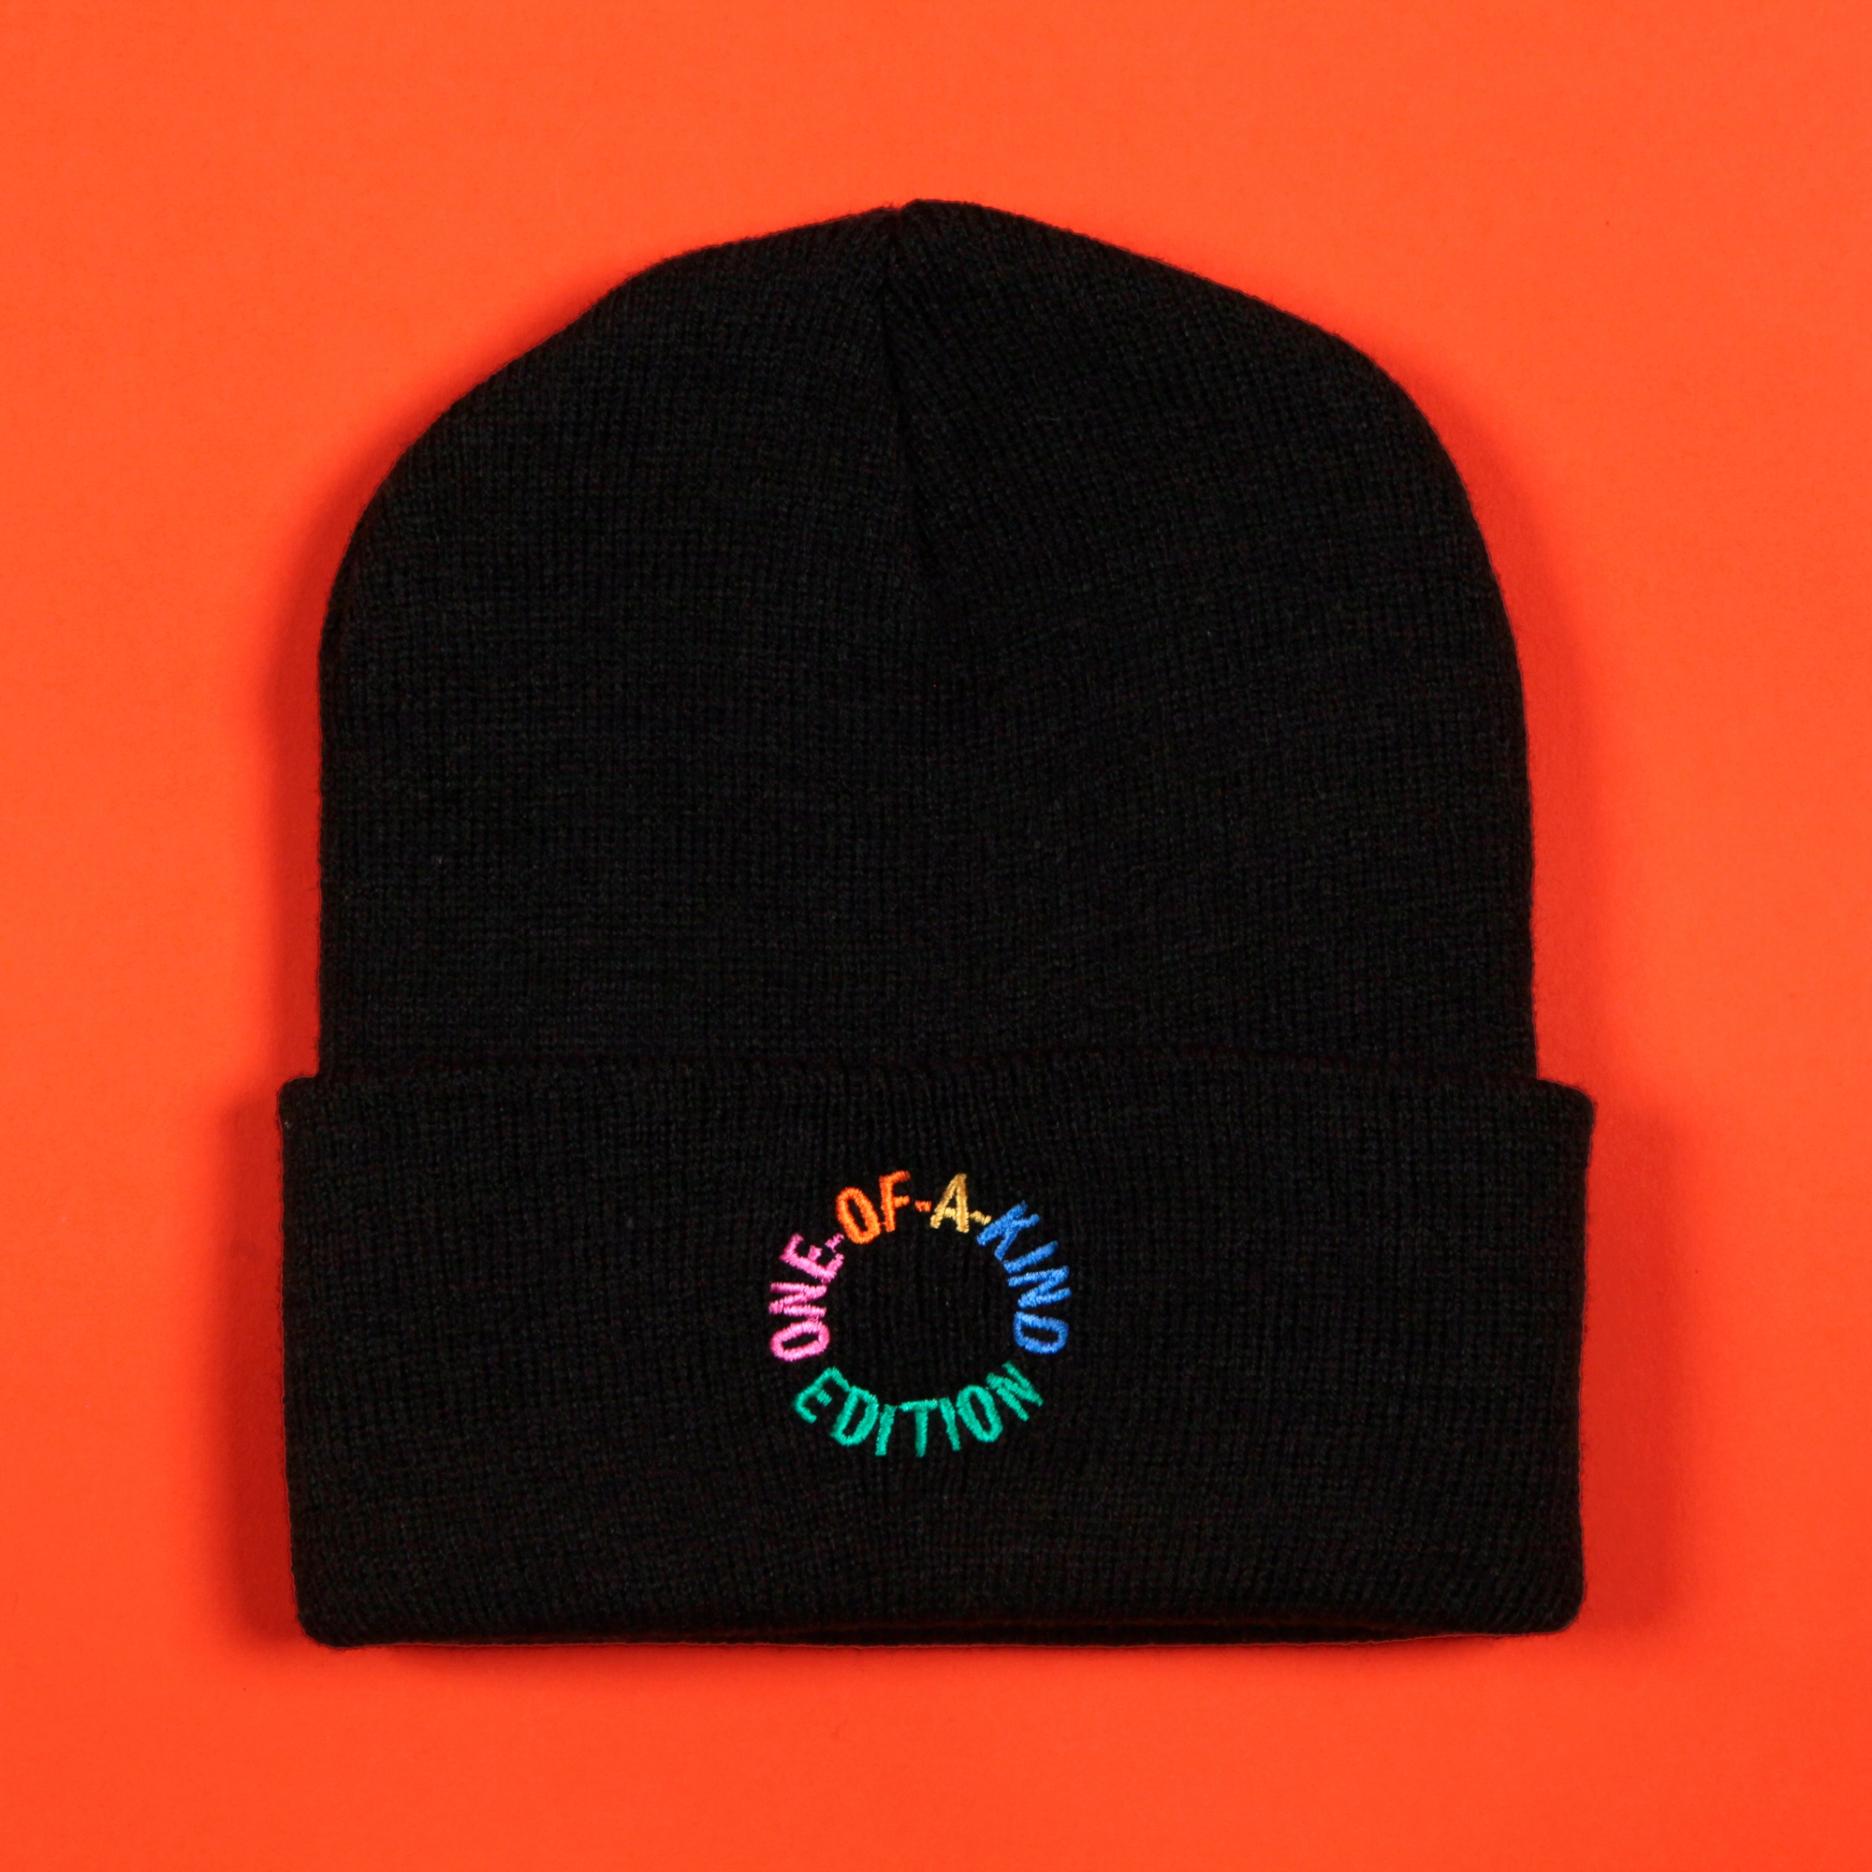 A photo of the black beanie against a tomato red background. The front of the beanie says "one-of-a-kind edition" in a circular text layout. Each word is a different color, in pink, orange, yellow, blue, and green. 